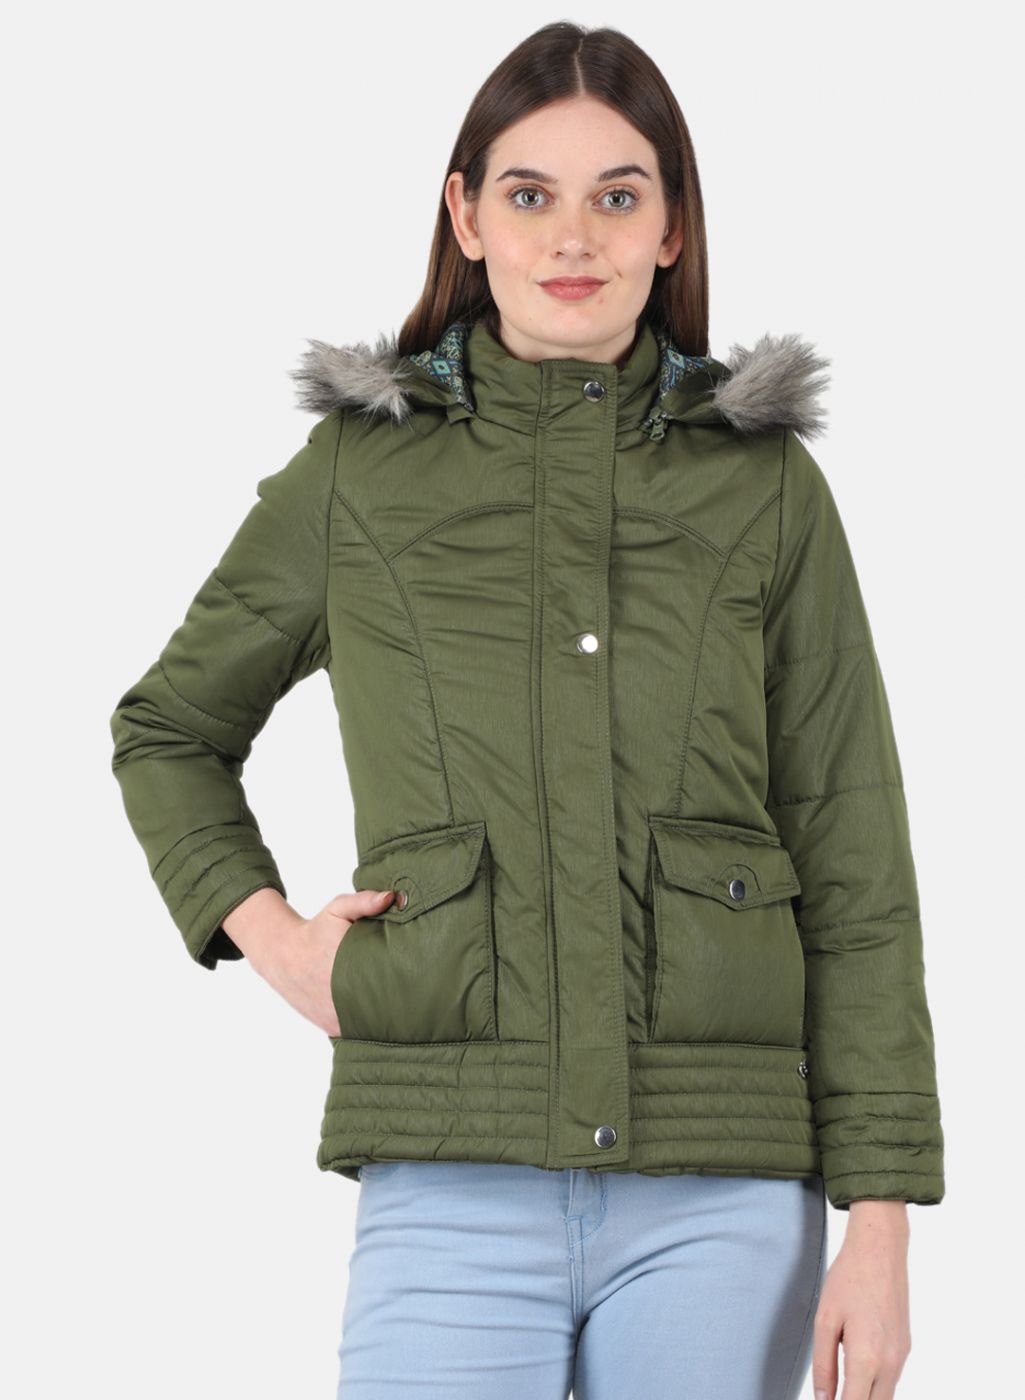 Buy Activewear Jacket in Olive Green Online India, Best Prices